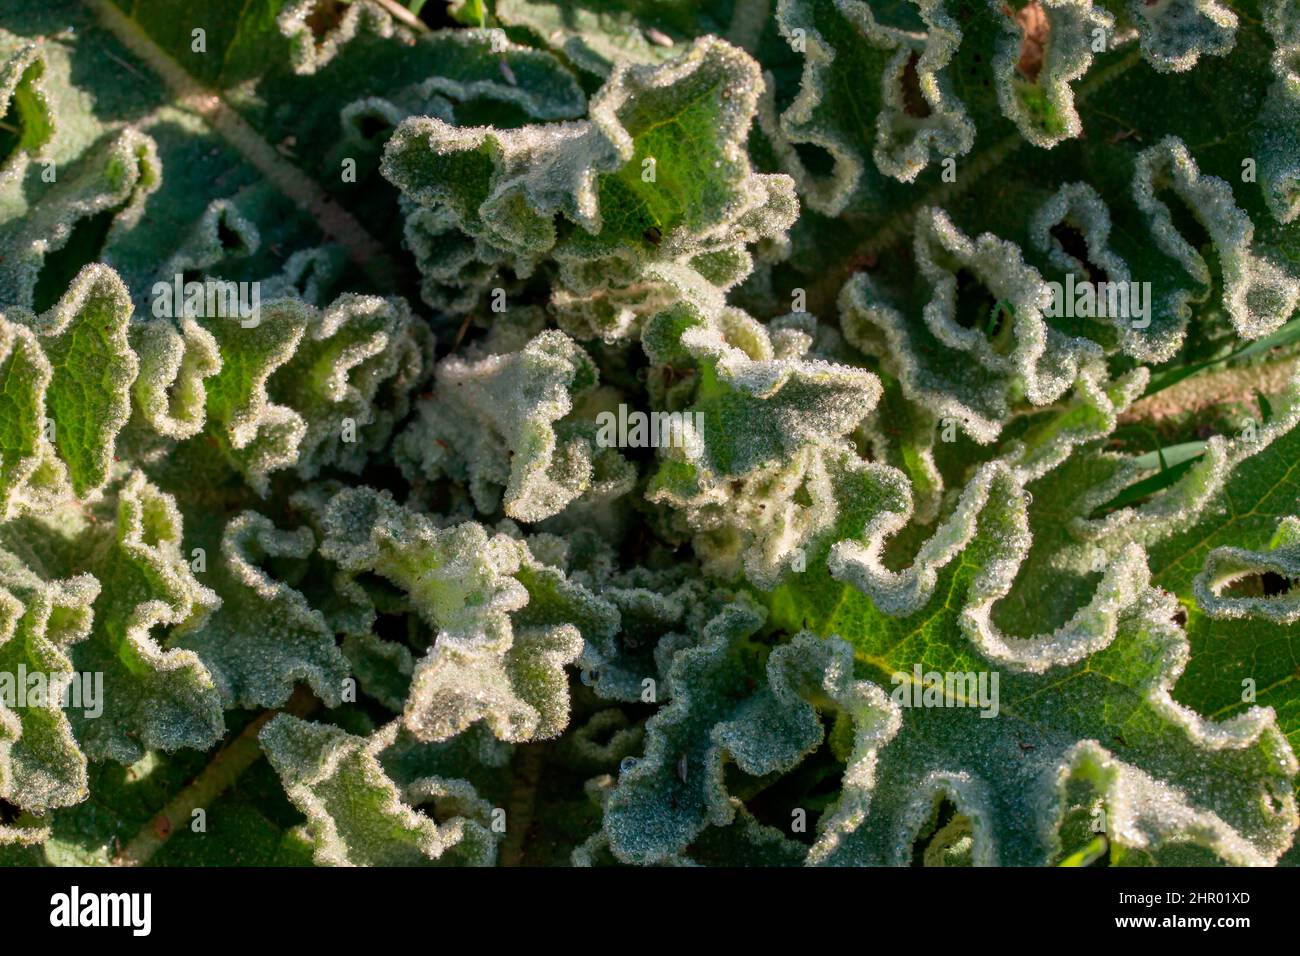 Scallop-leaved mullein (Verbascum sinuatum), dew covered leaves, Gard, France Stock Photo